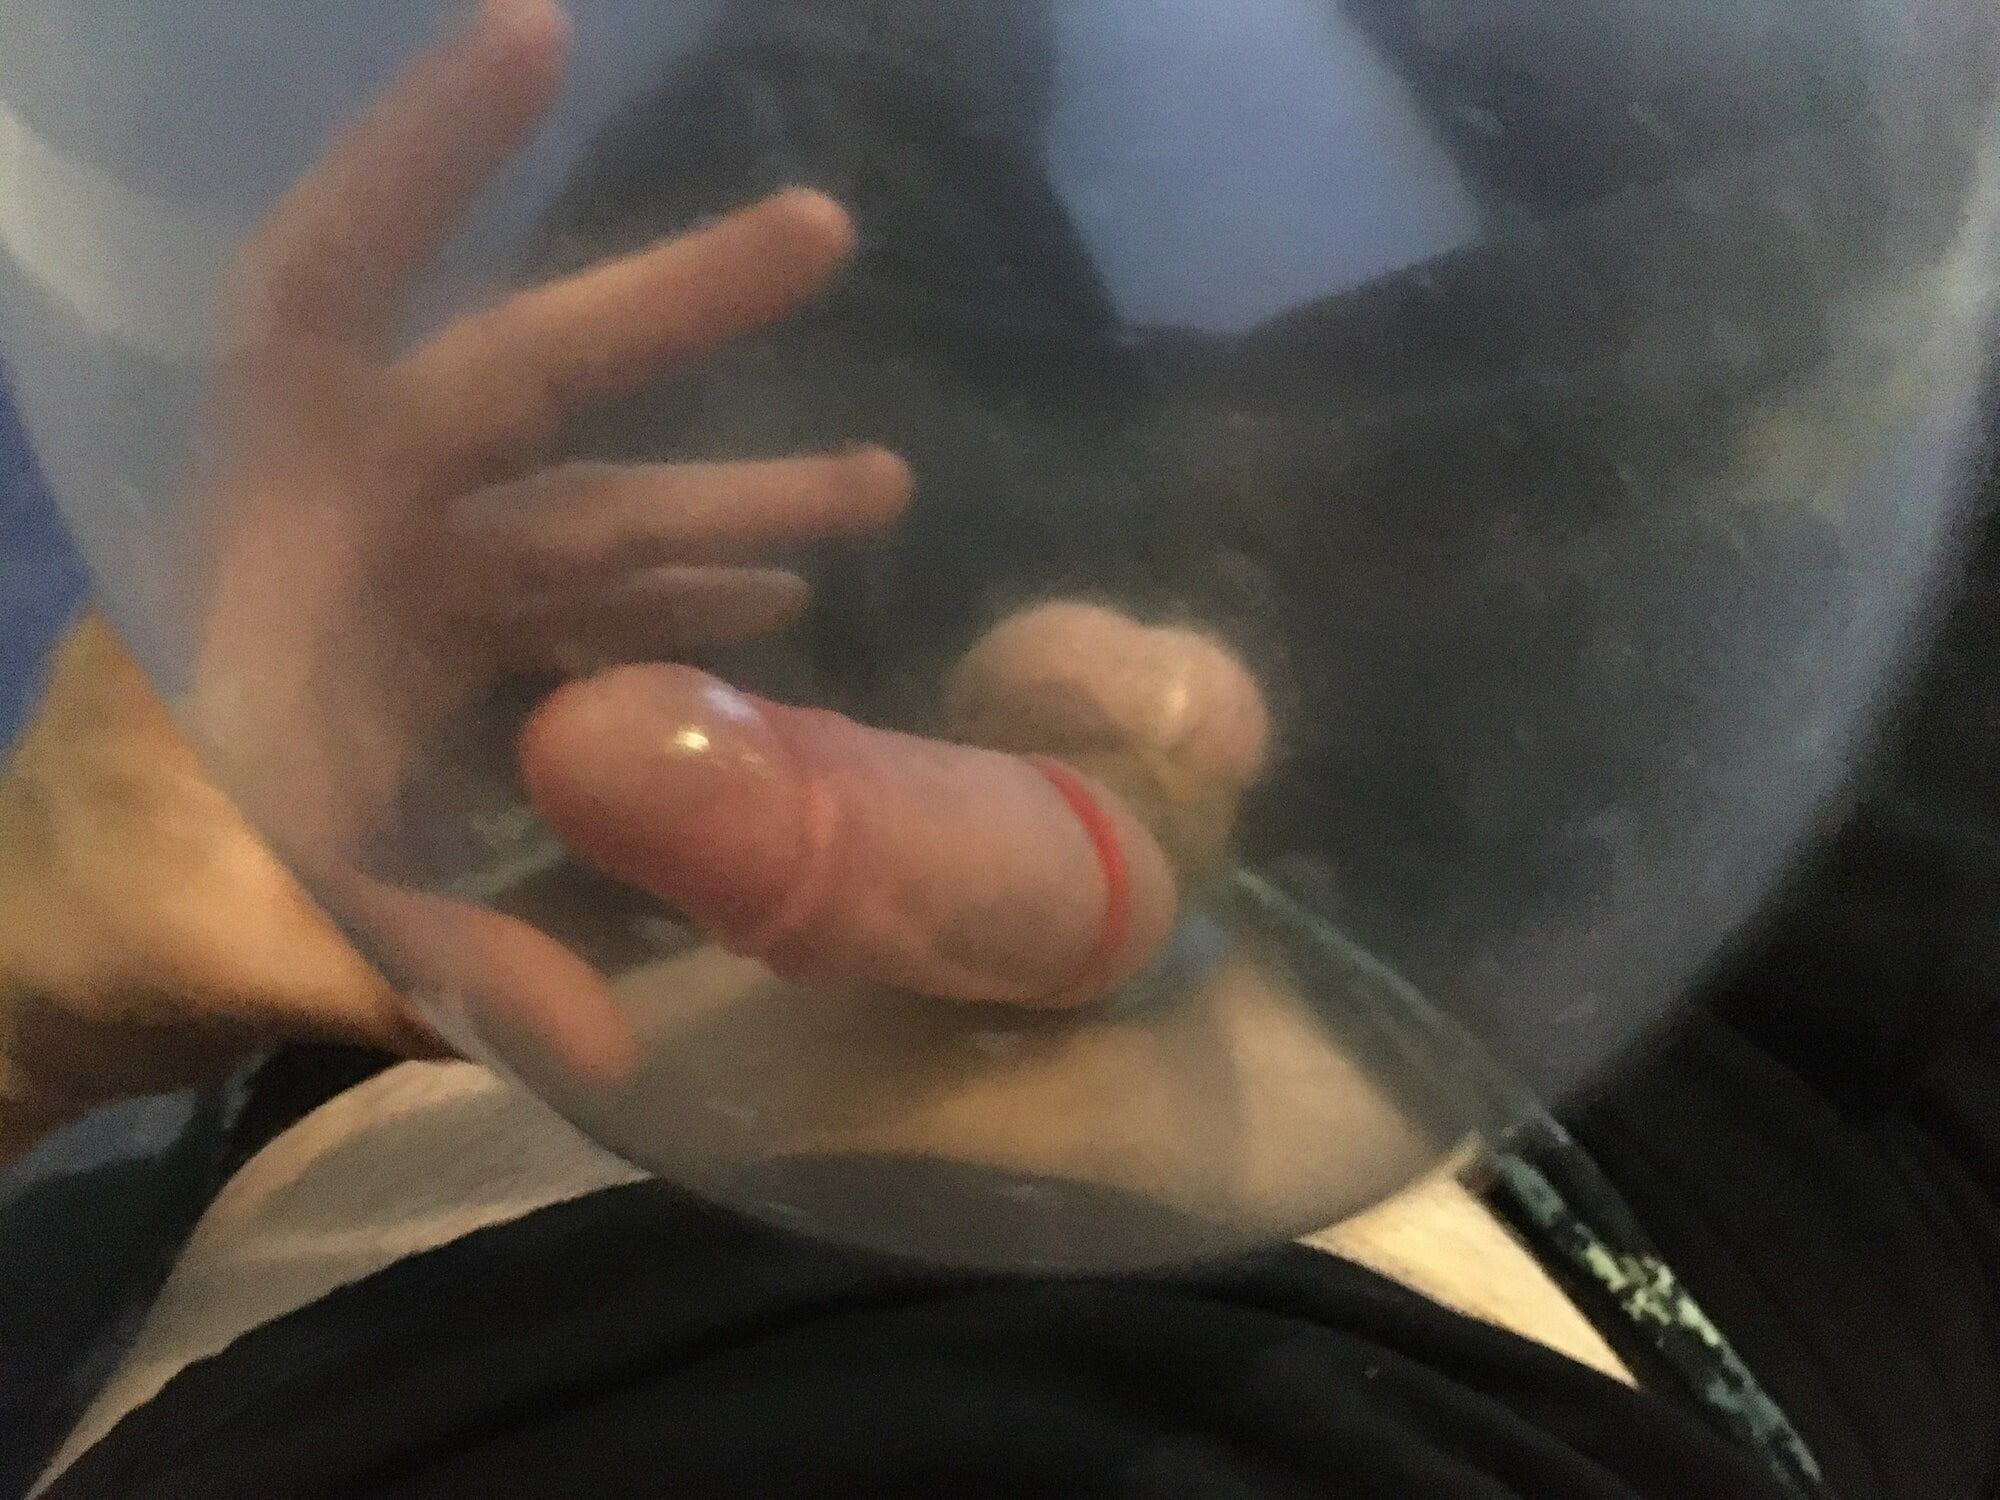  Haired Dick And Balls With Rubber Bands Condom Ballon  fuck #22